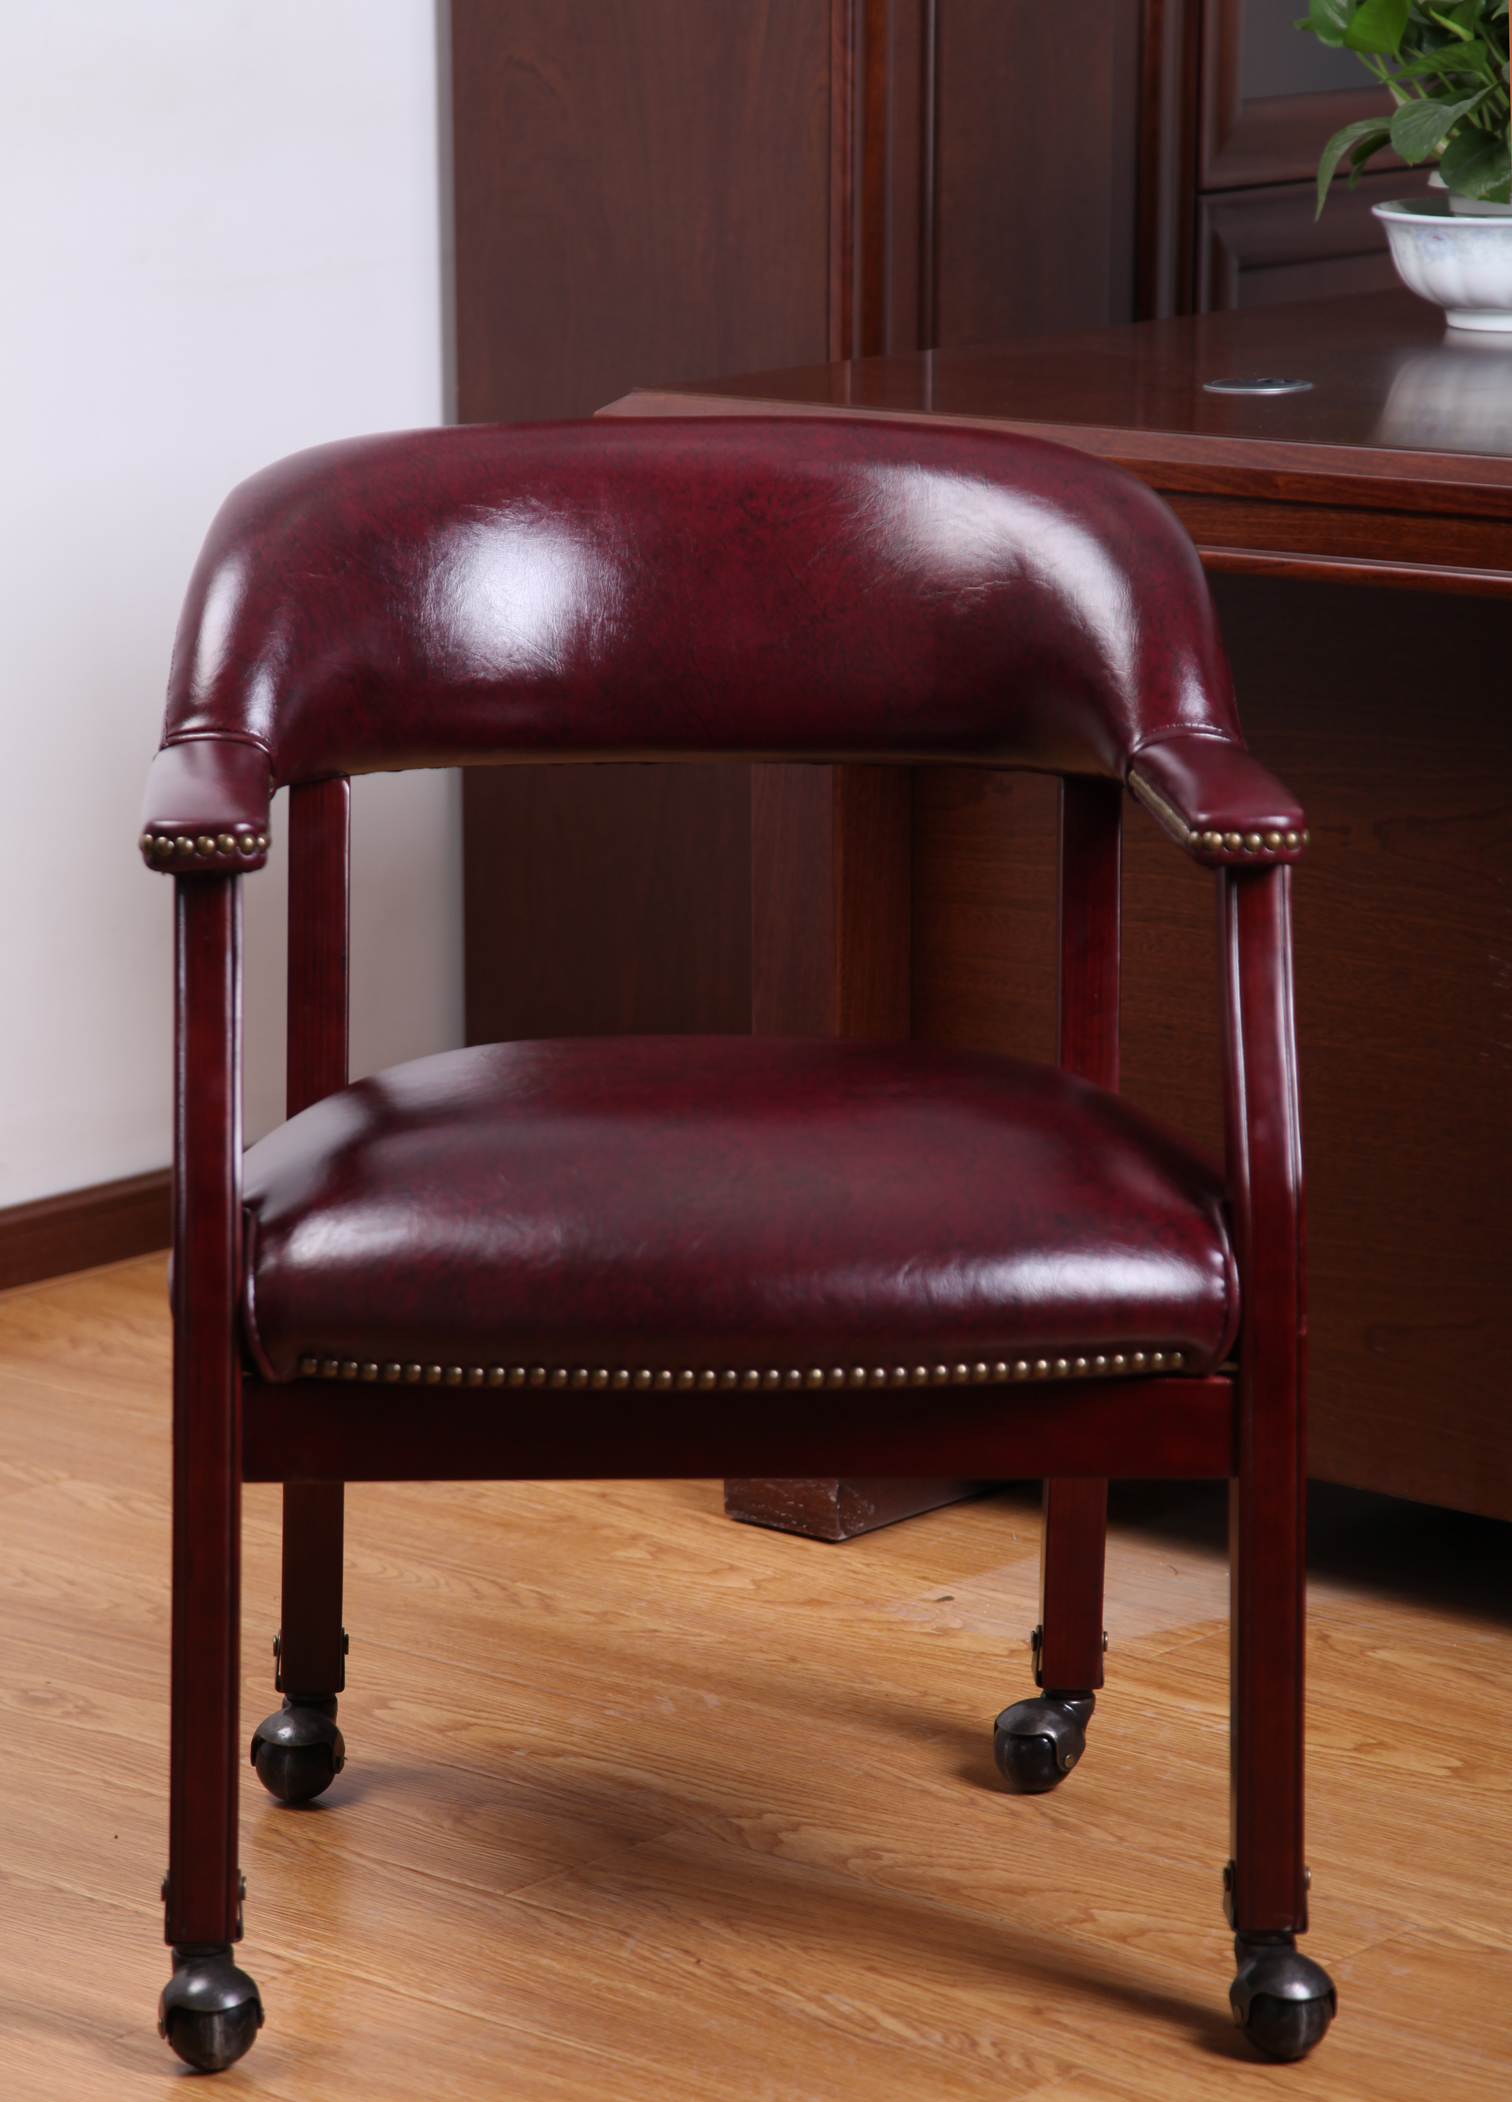 Dining Chair In Burdy Vinyl, Leather Dining Chairs With Casters